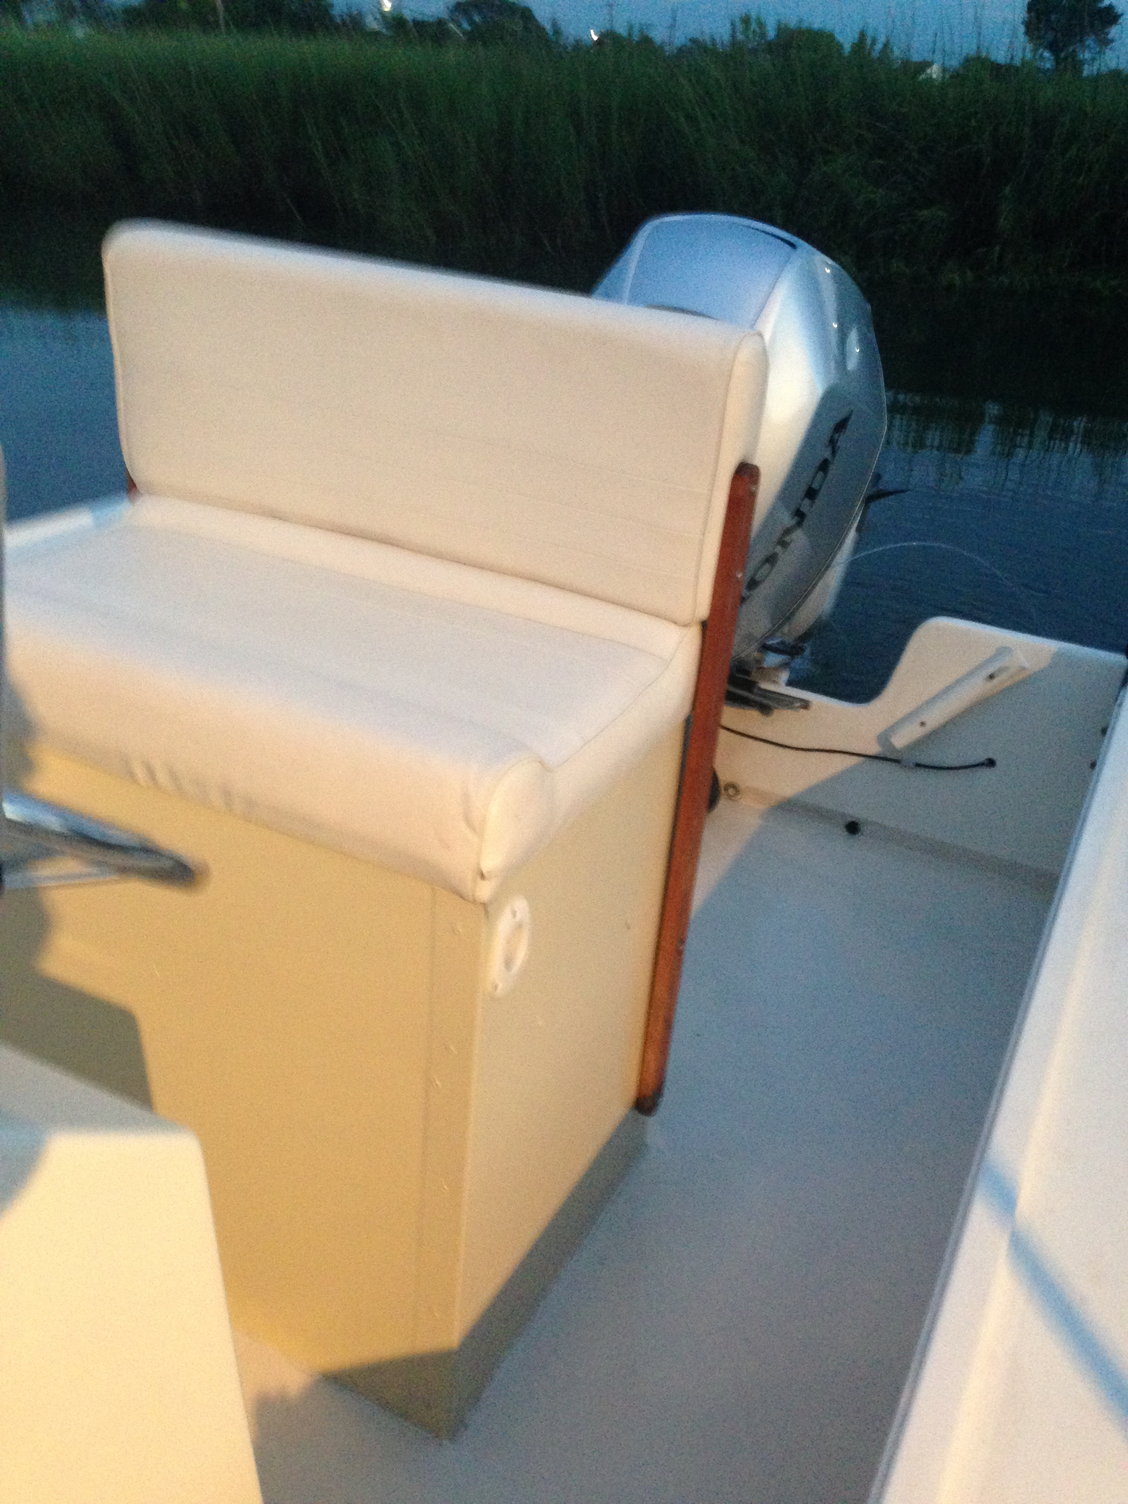 COMFORTABLE Leaning Post ? - The Hull Truth - Boating and Fishing Forum